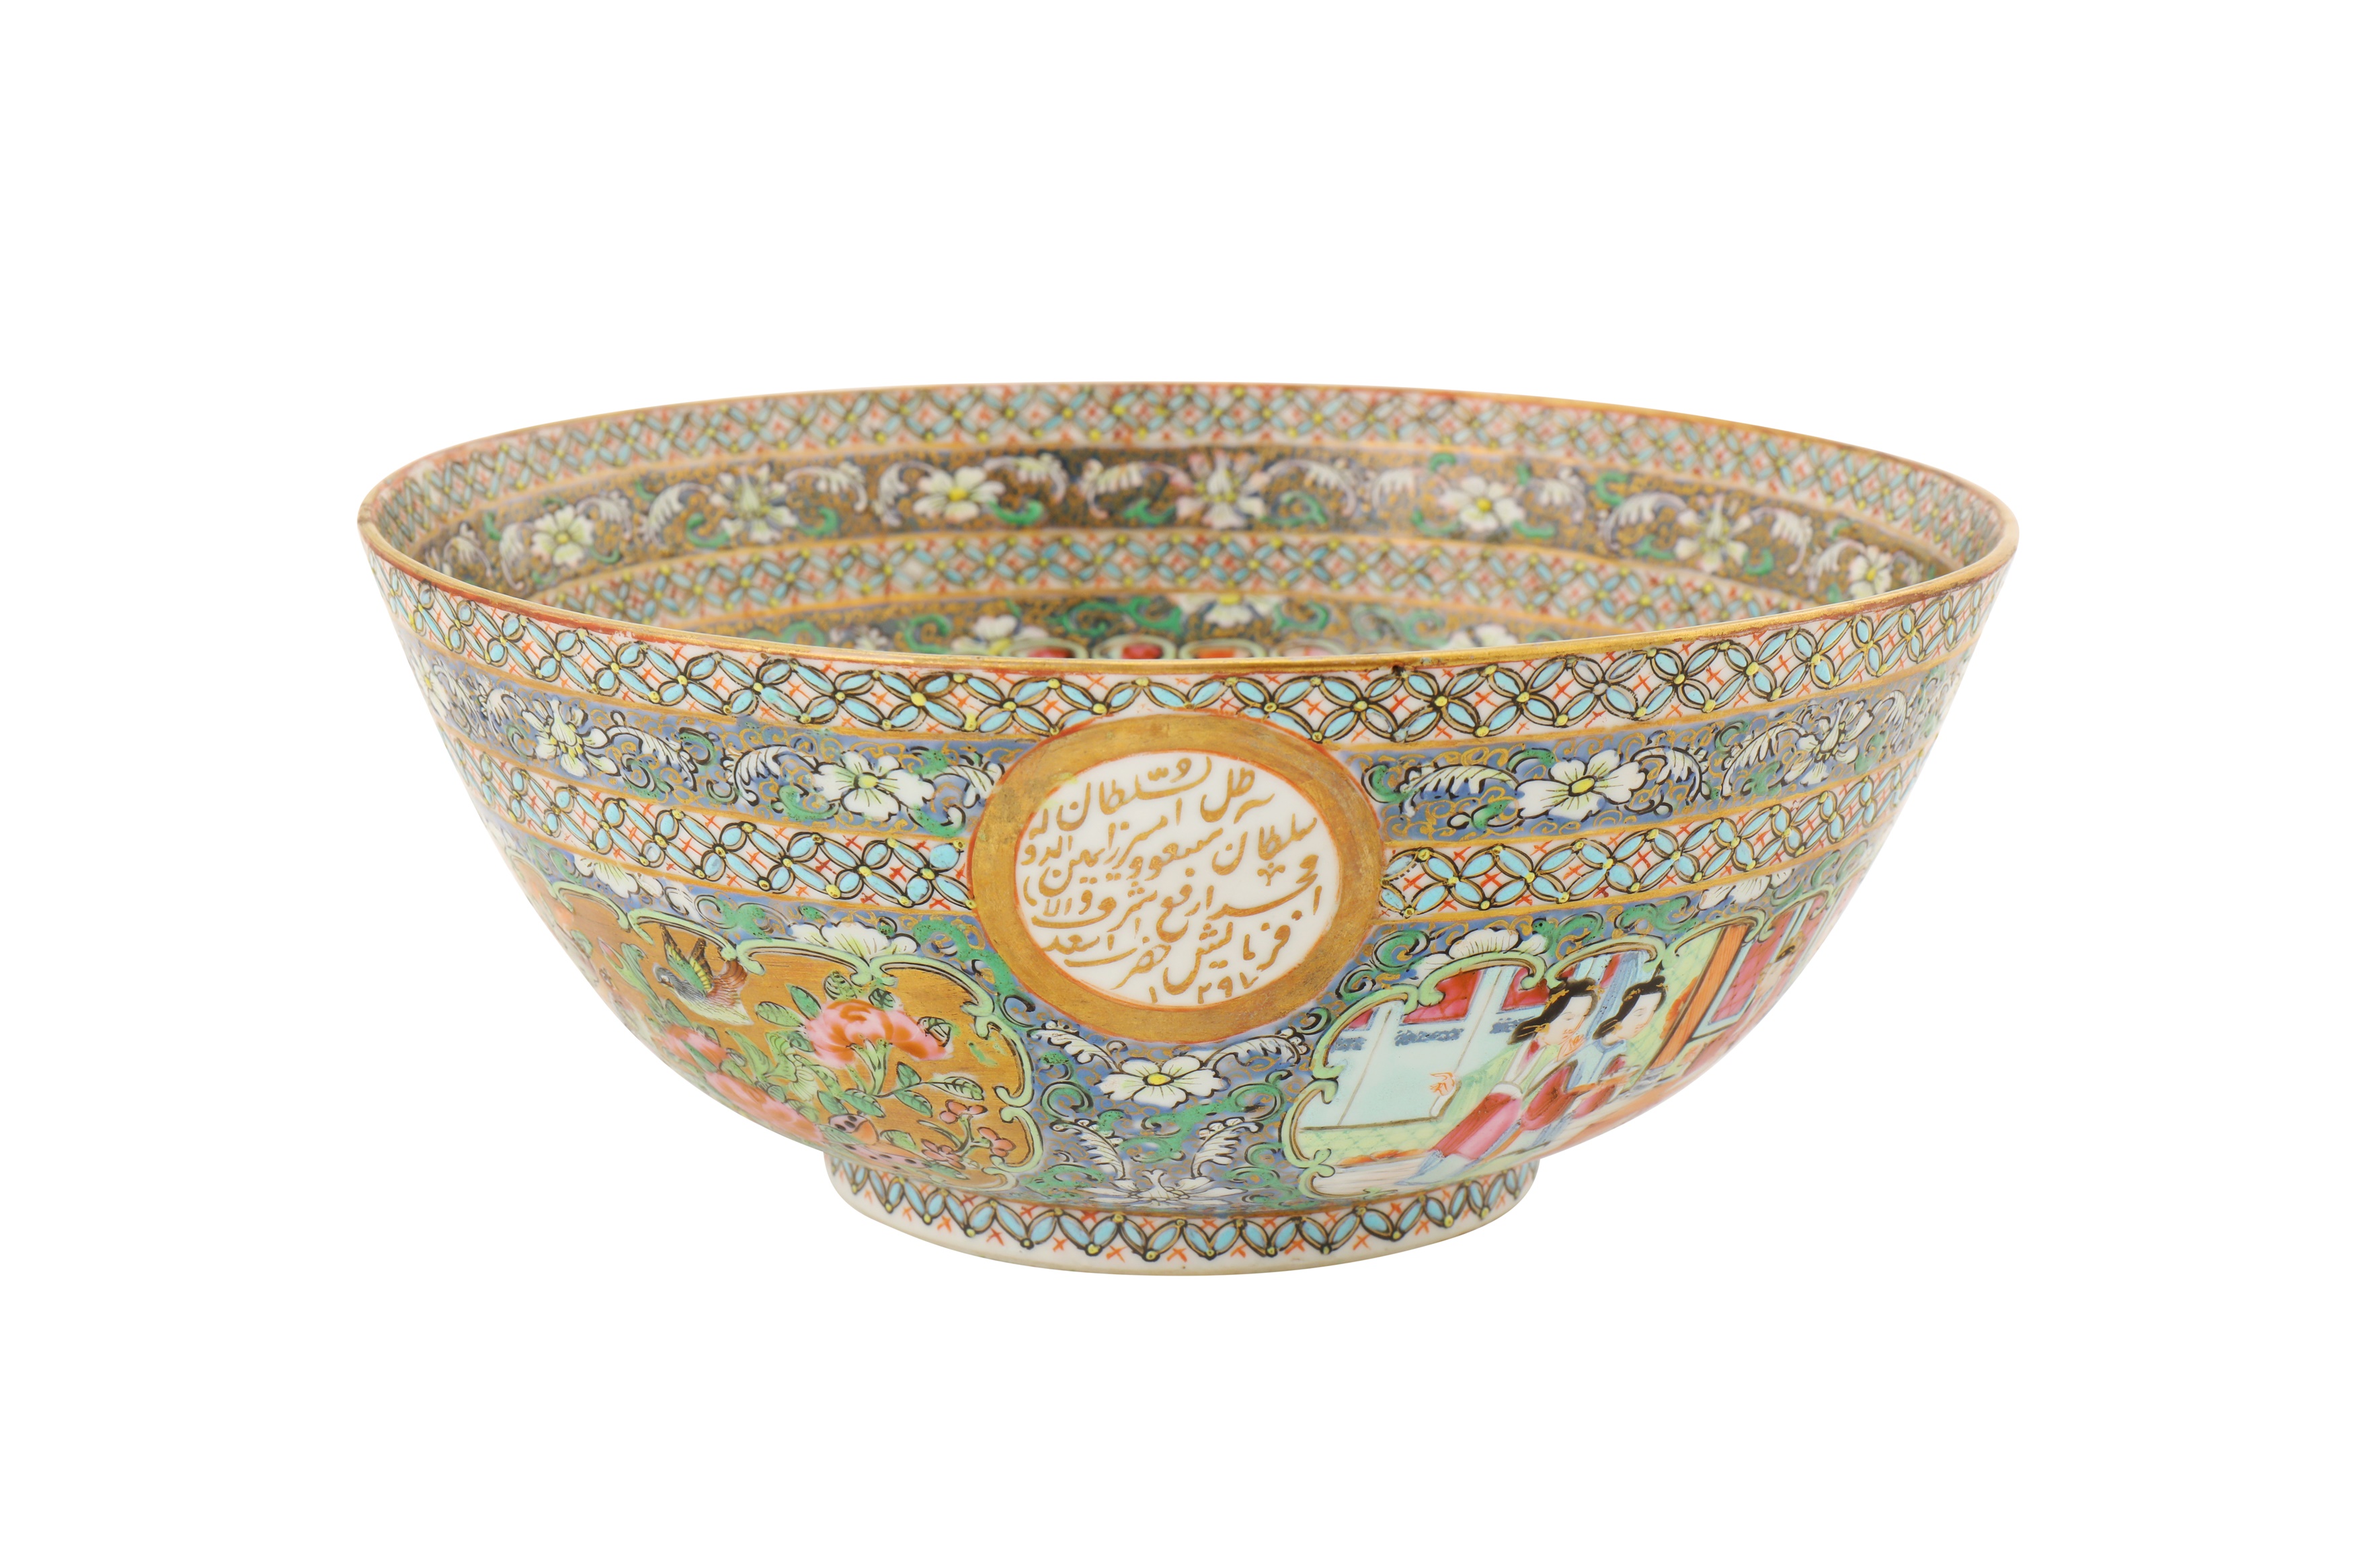 A MEDIUM SIZED BOWL AND DISH FROM THE ZILL AL-SULTAN CANTON PORCELAIN SERVICE - Image 2 of 8